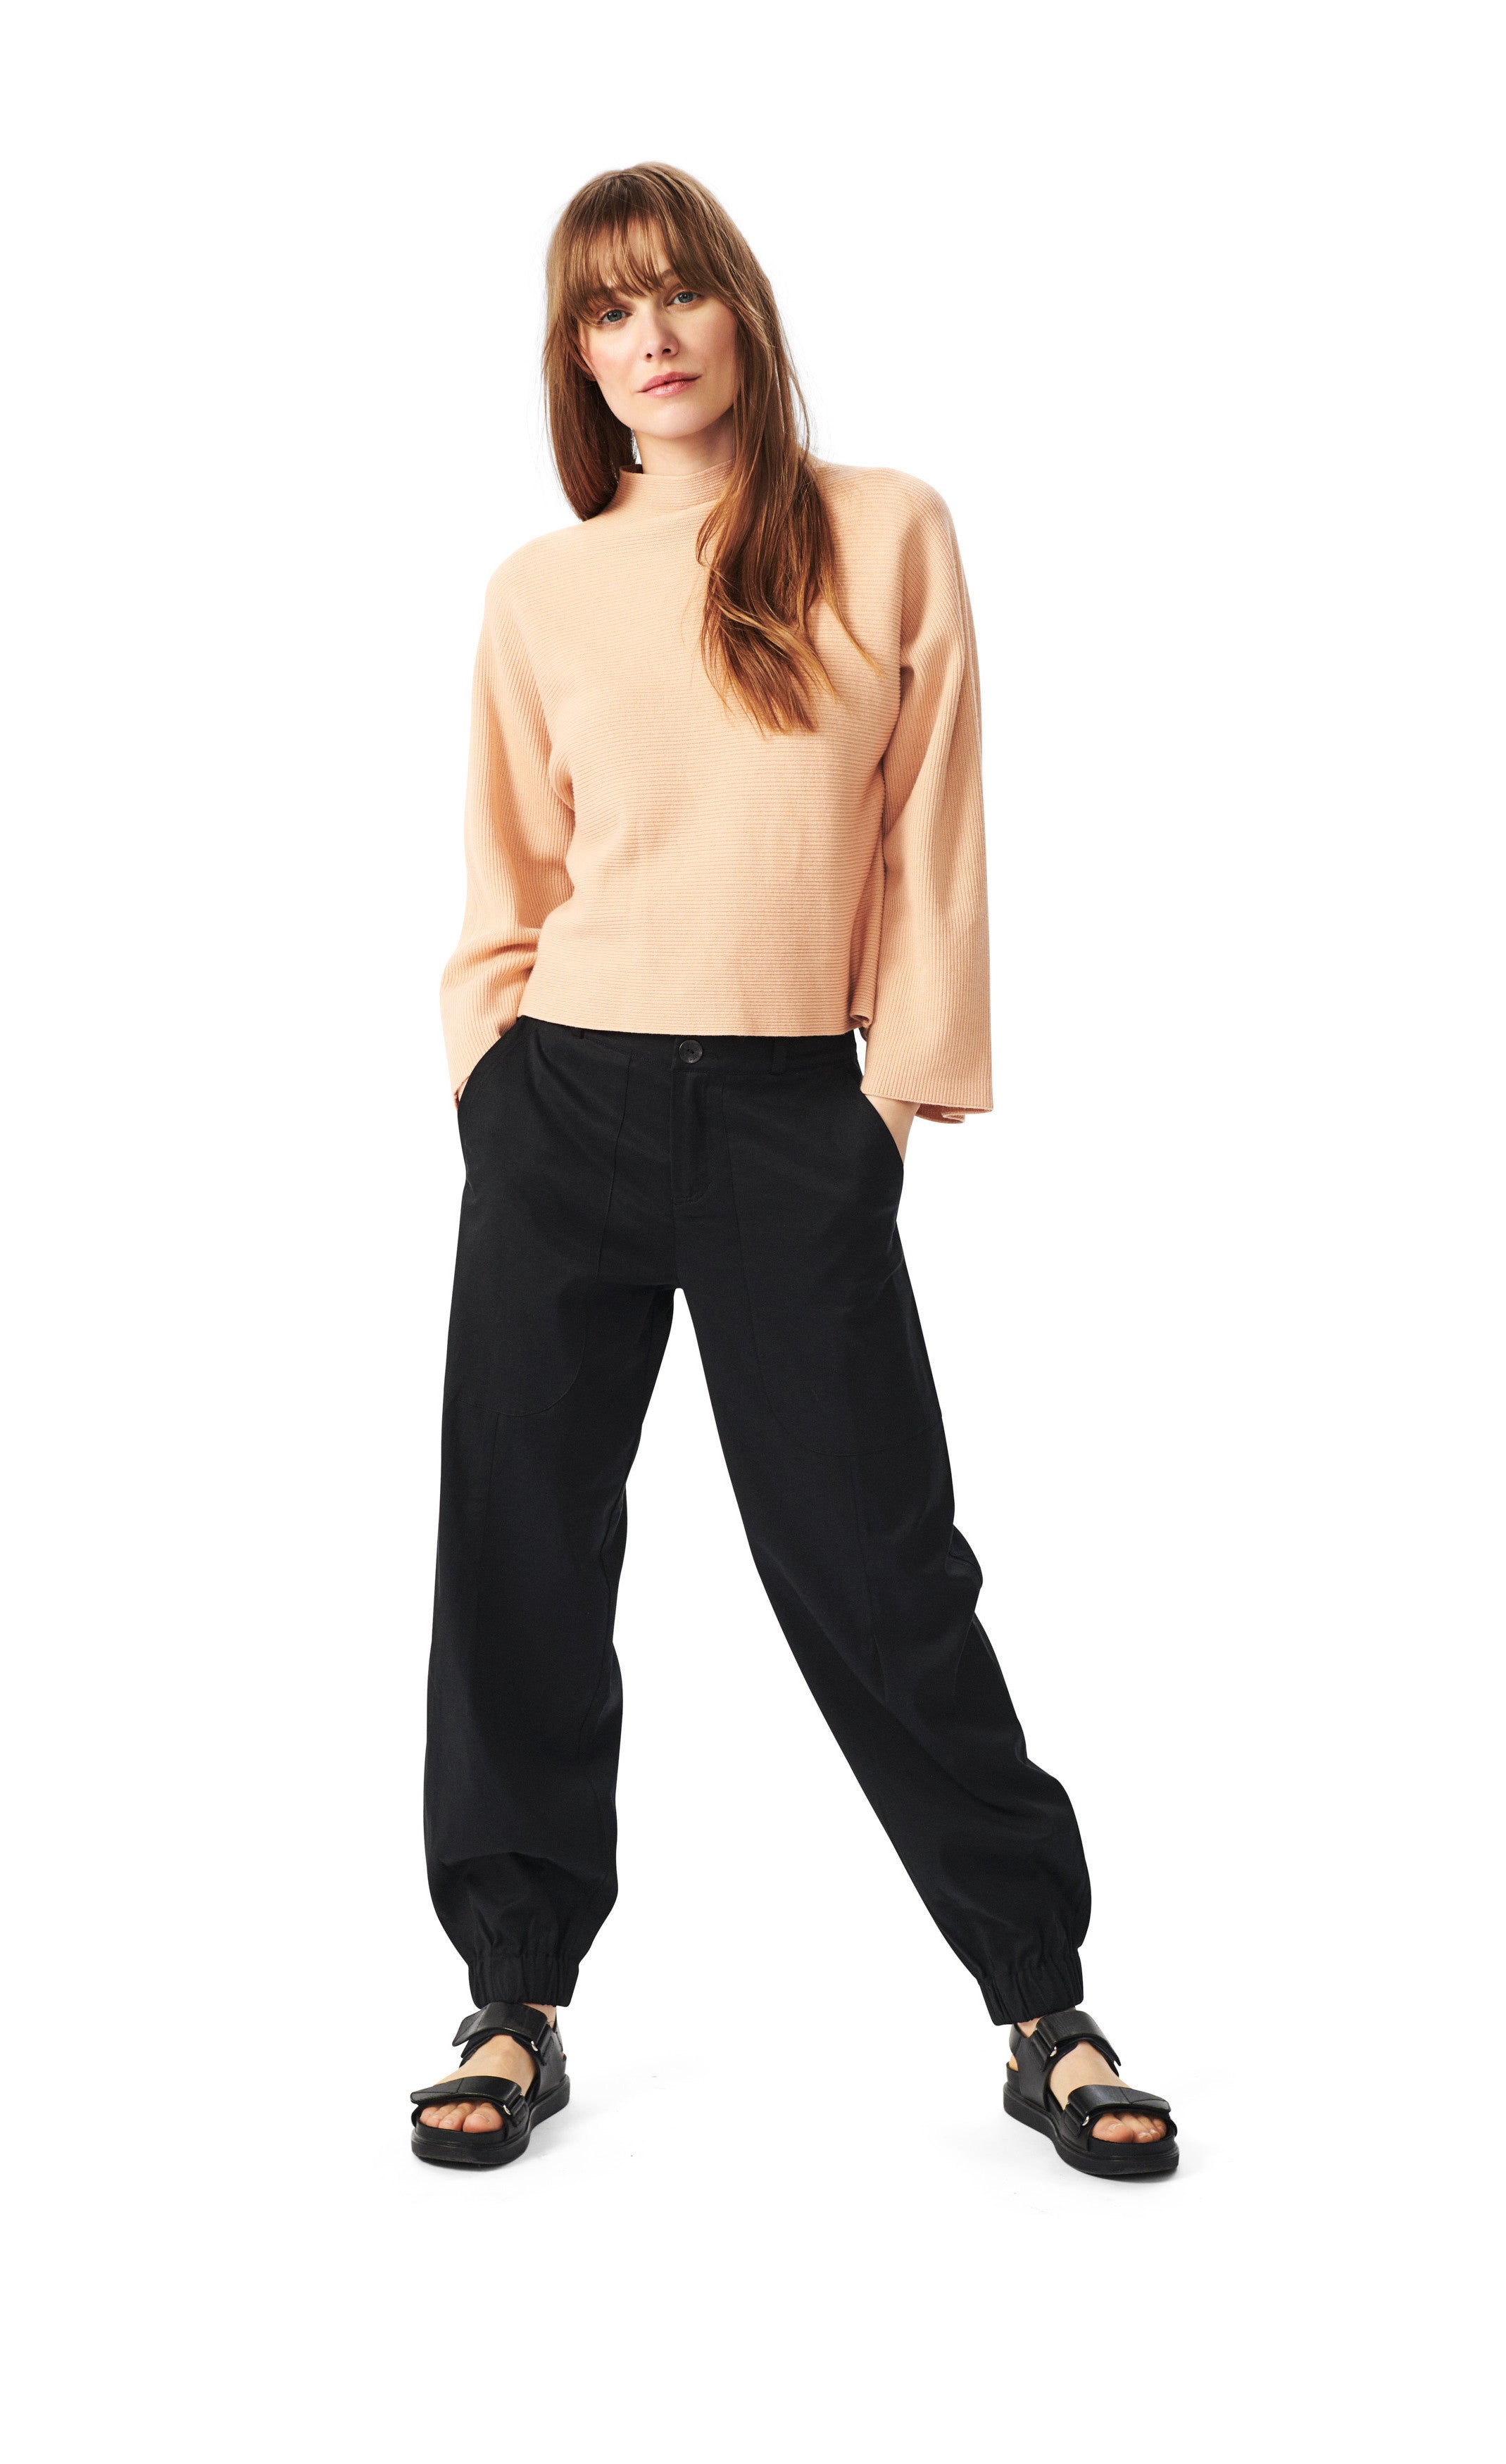 Front full body view of a woman wearing the bitte kai rand botanic twill elastic pant. This pant is black and has a relaxed fit with an elastic hem.